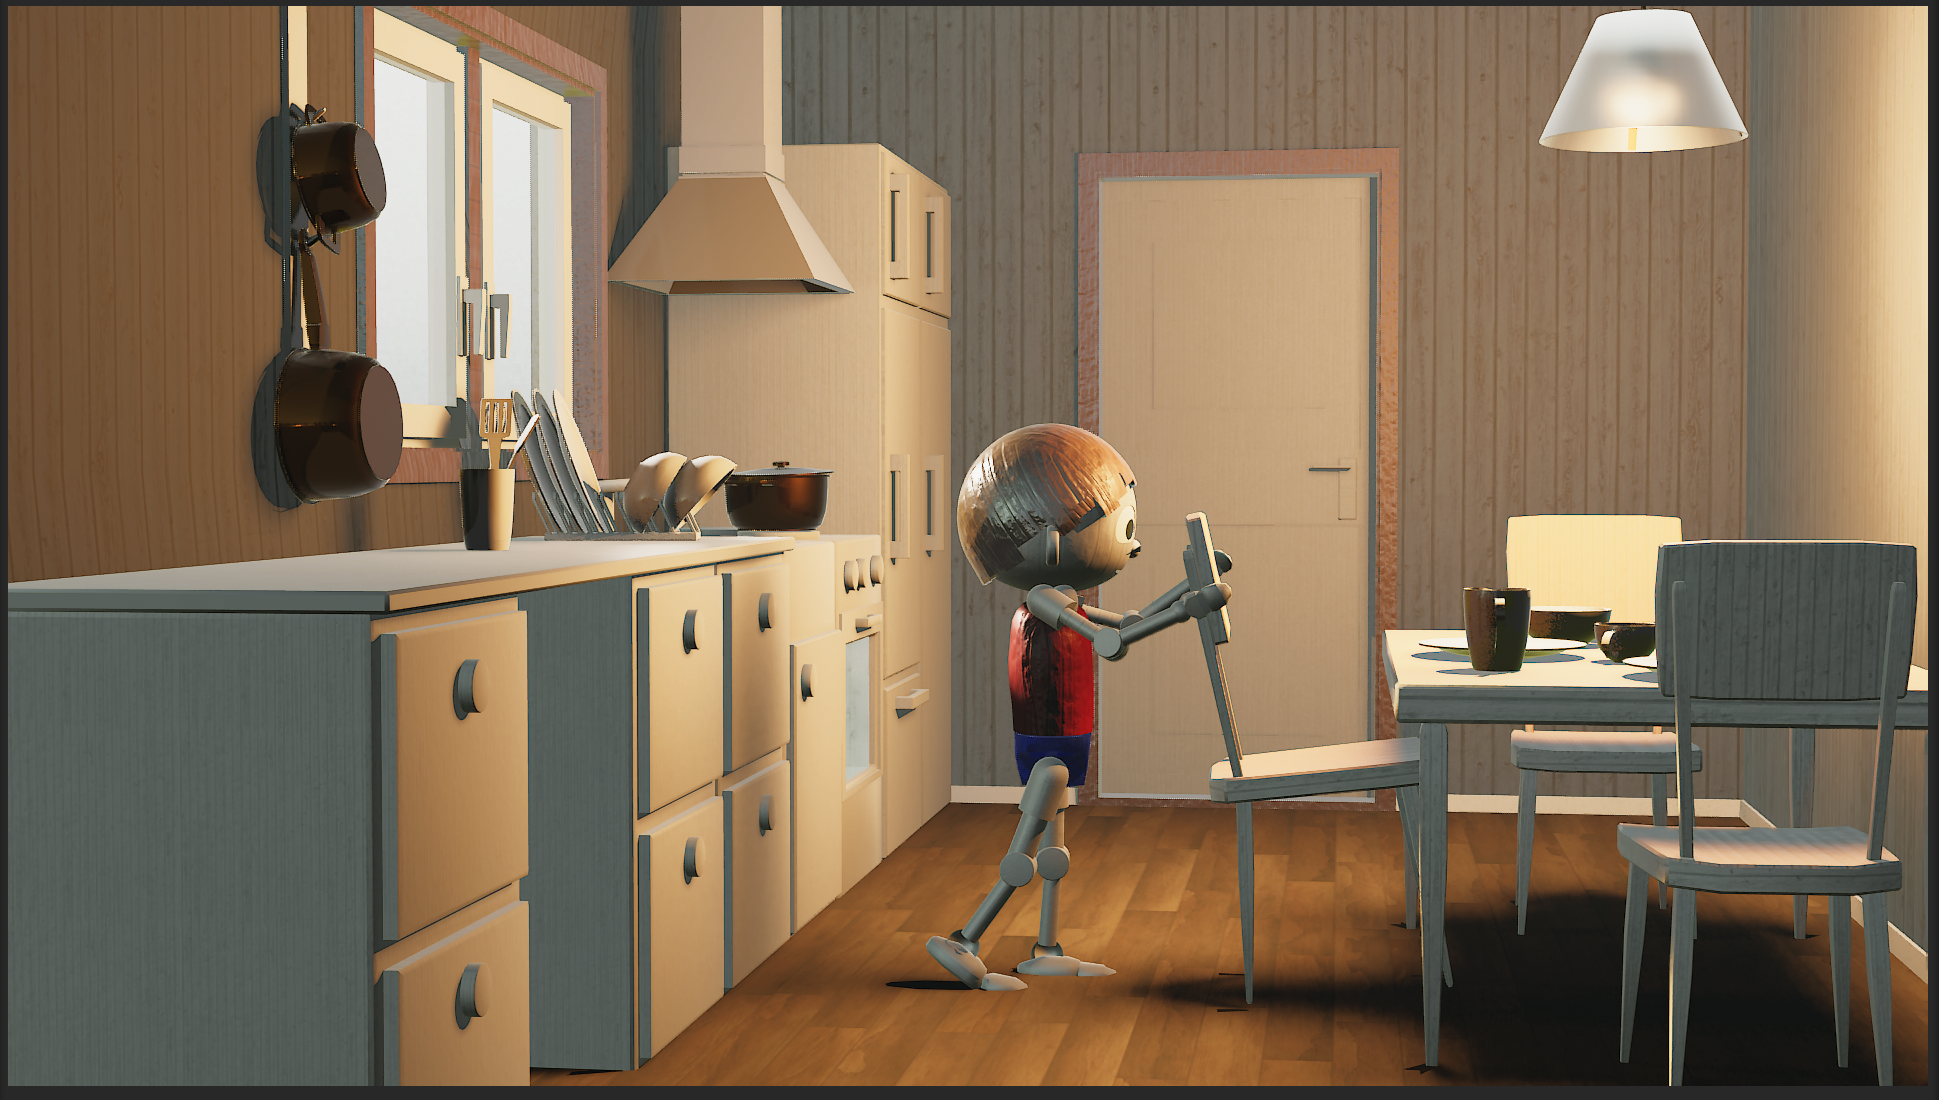 A still from Project Leolina. A robot-like boy is pulling out a chair at a table in a kitchen.